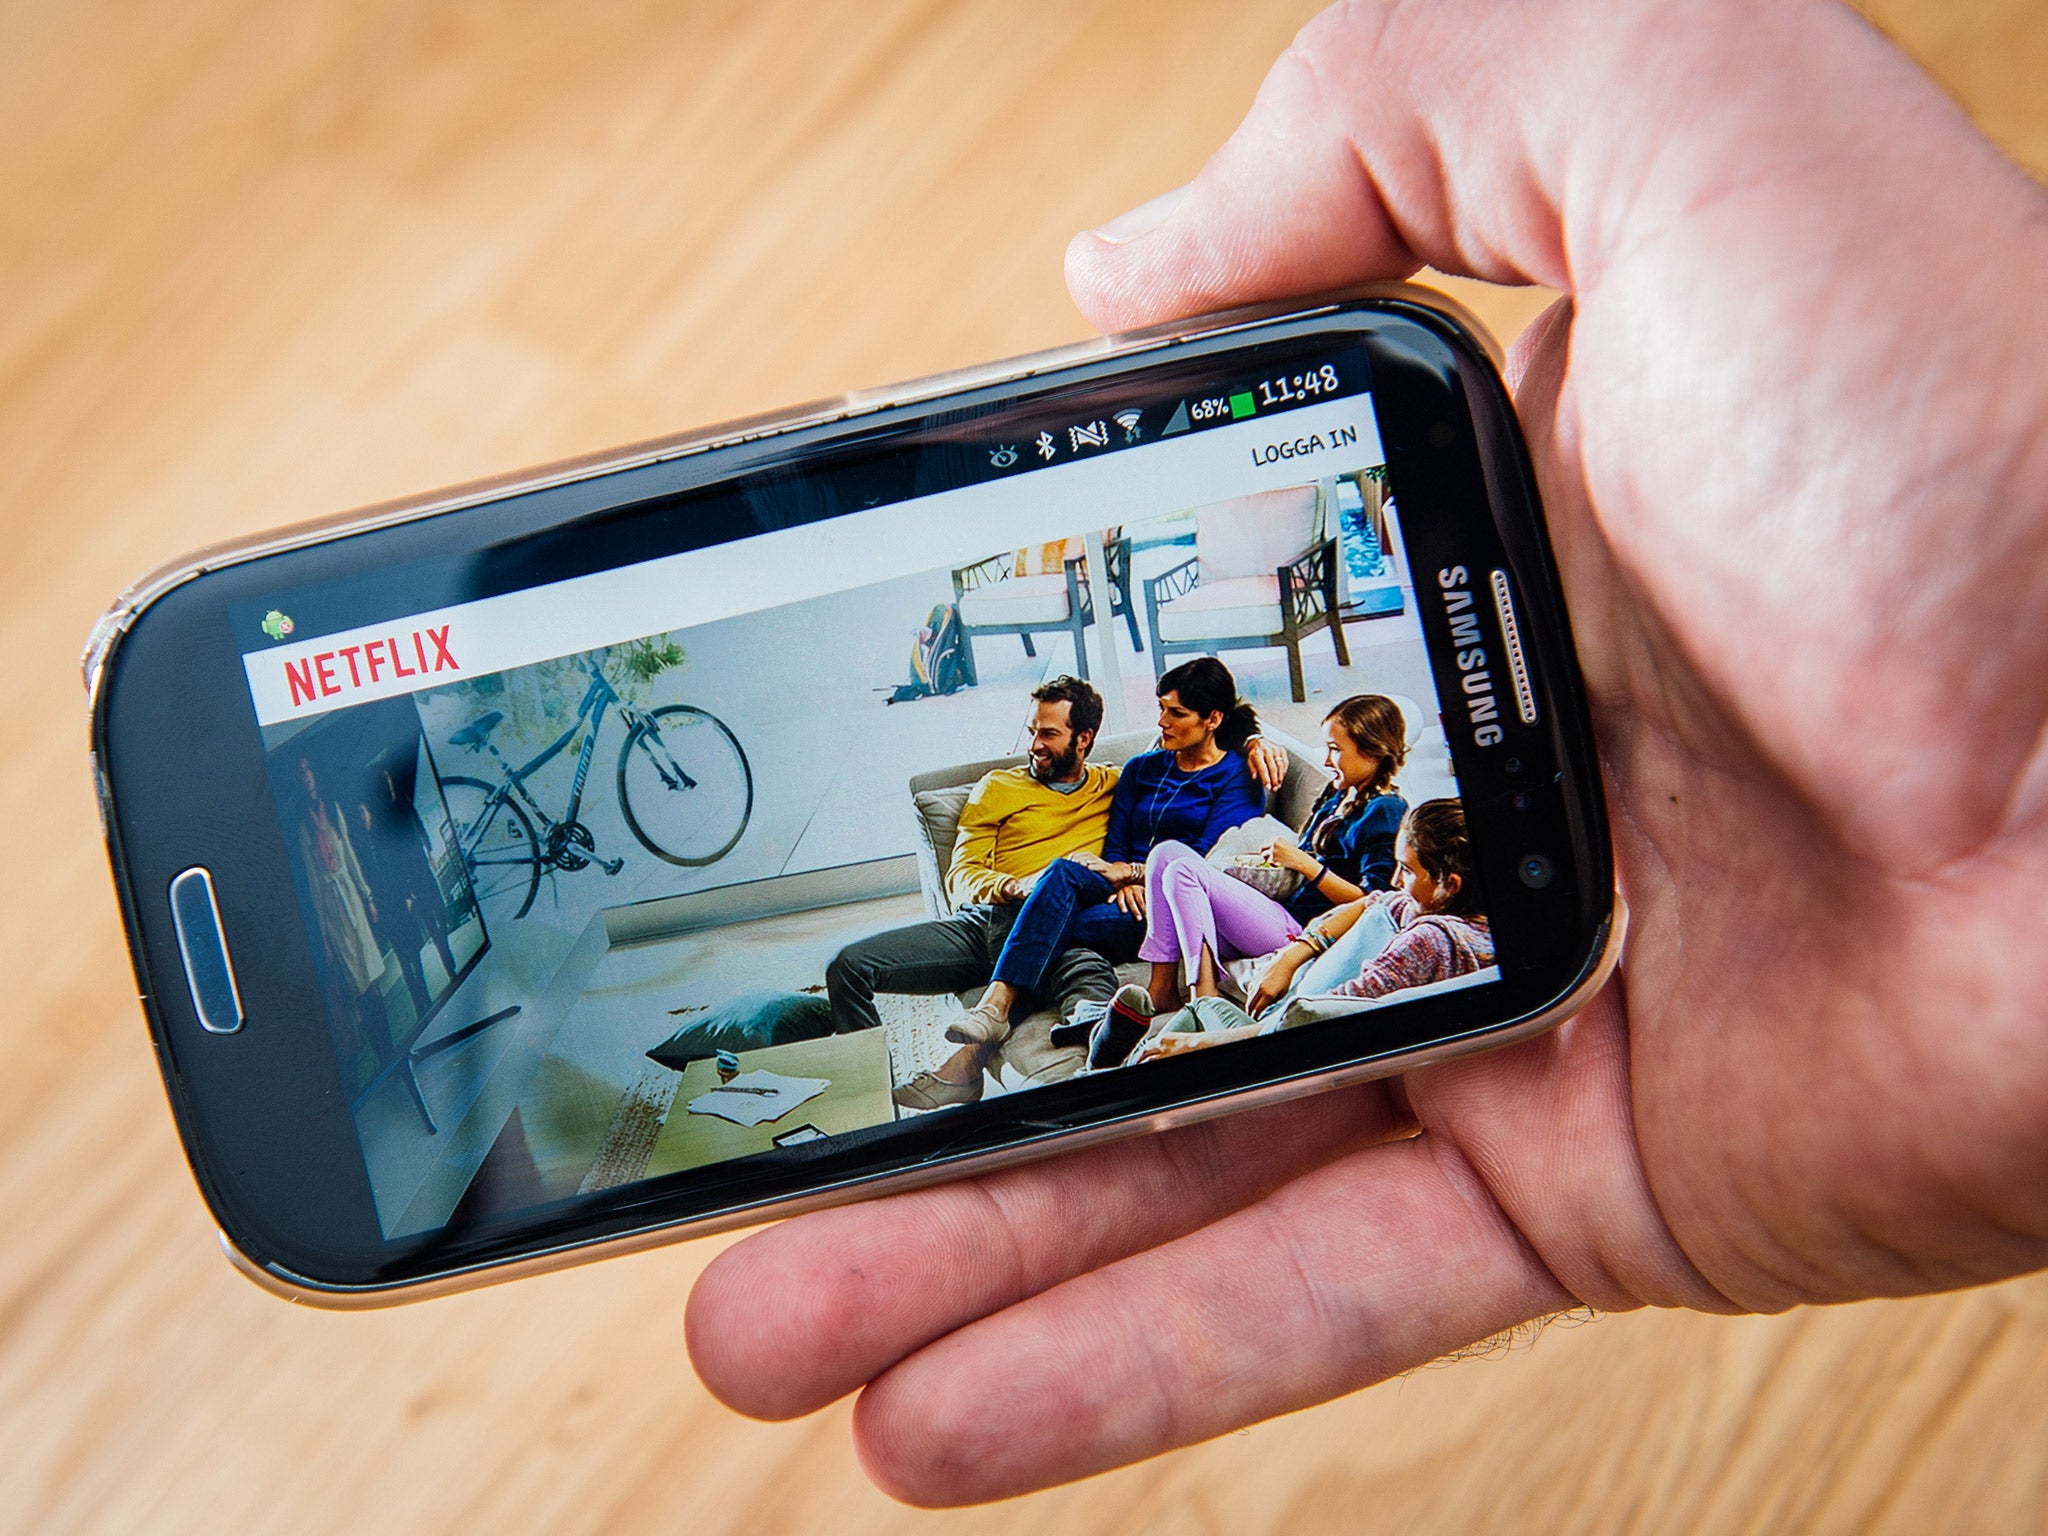 Increased internet speeds will mean a smoother viewing experience for smartphone streamers